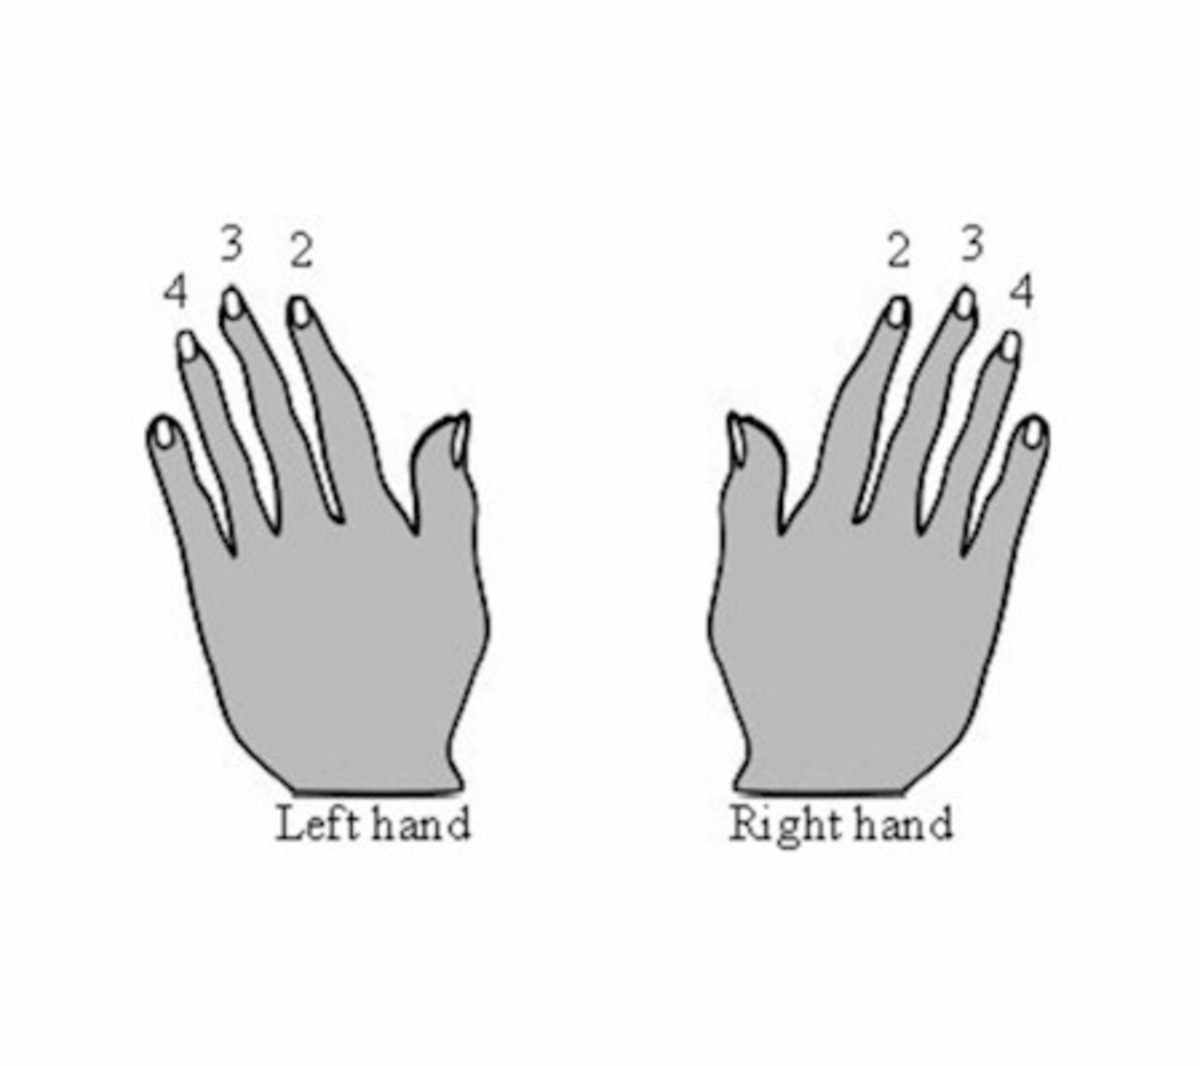 Use fingers 2, 3 and 4 to start playing piano music